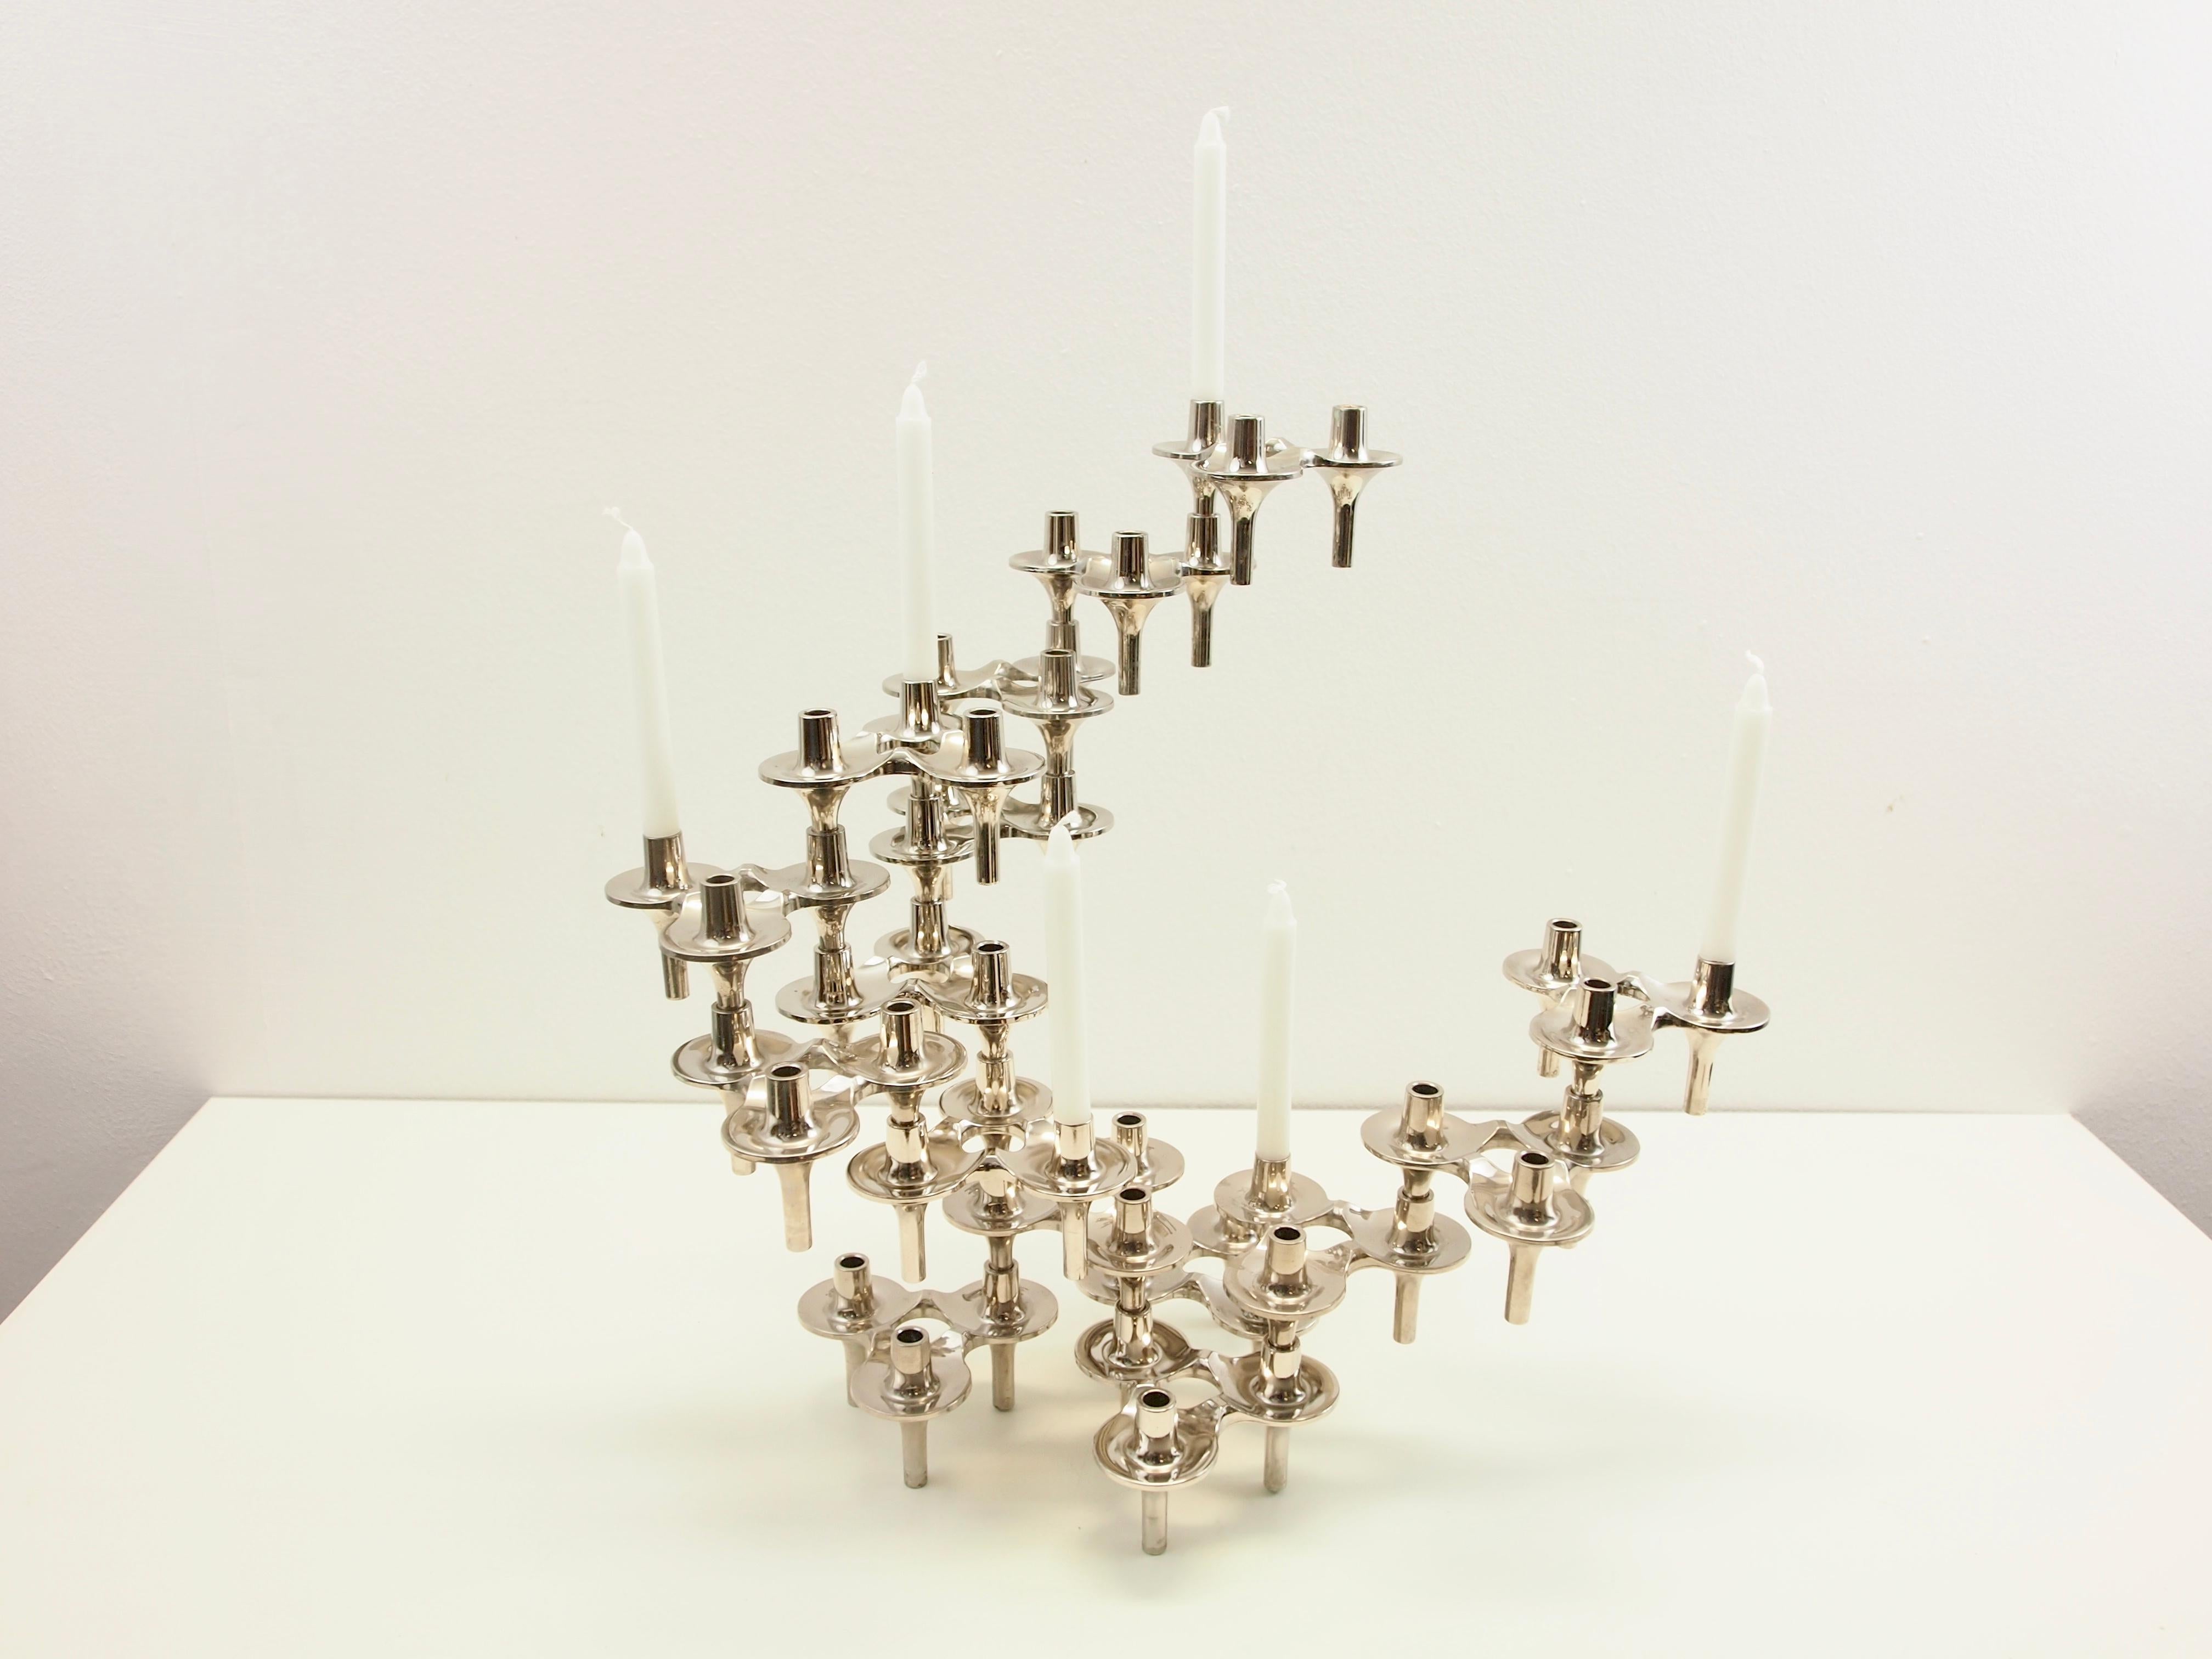 Sculpture of 16 modular vintage midcentury candleholders by Fritz Nagel and Ceasar Stoffi for BMF model 